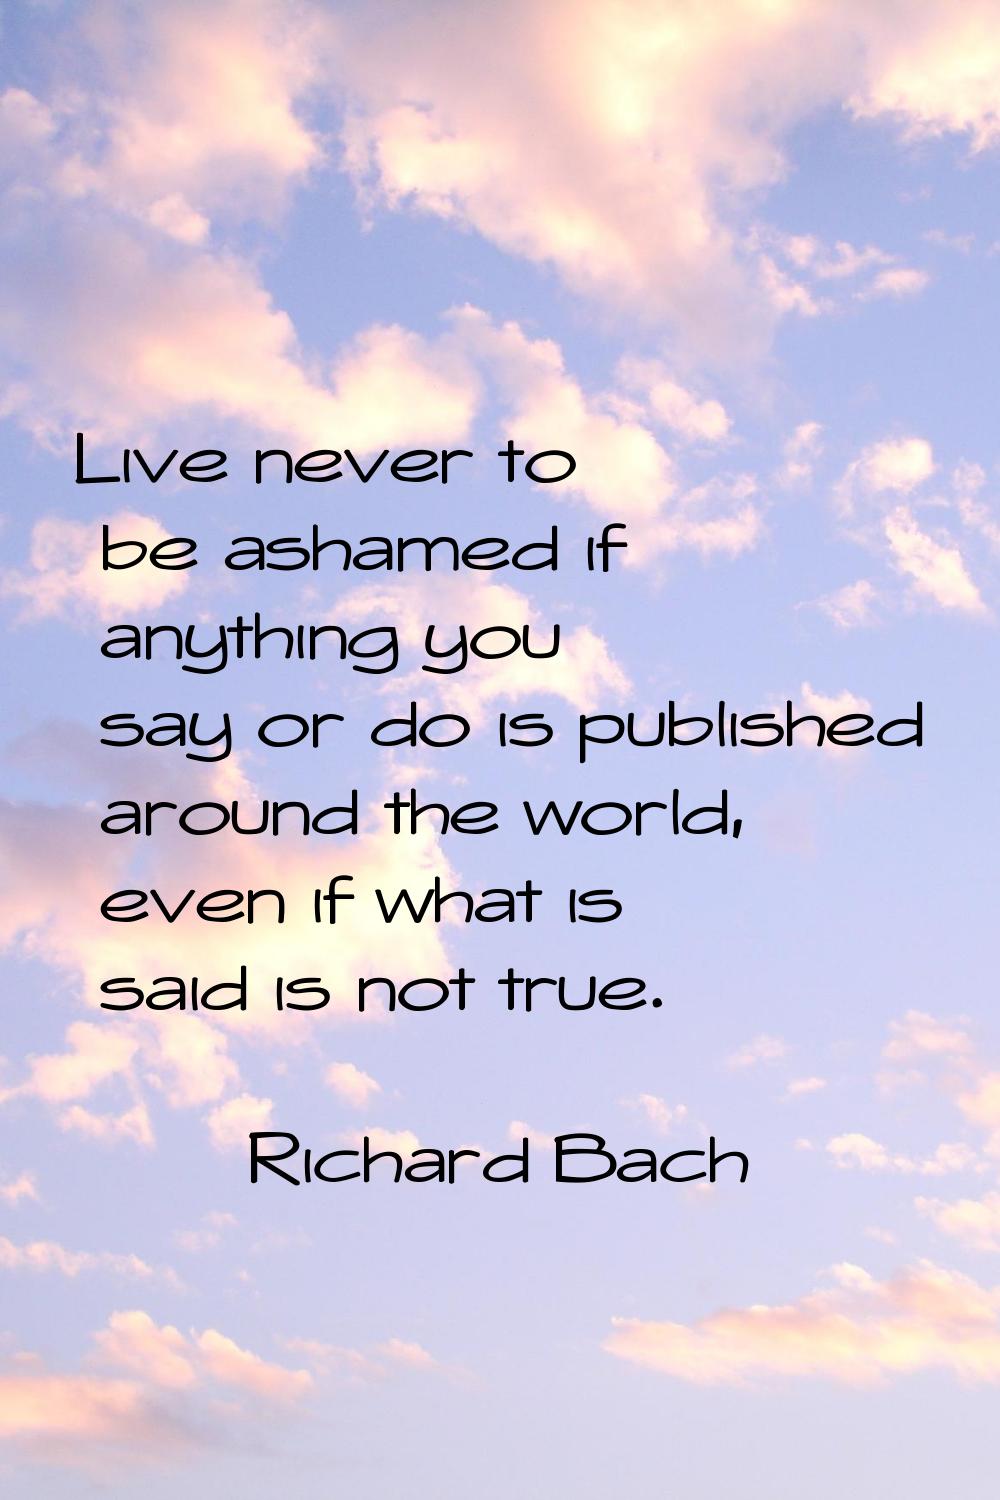 Live never to be ashamed if anything you say or do is published around the world, even if what is s